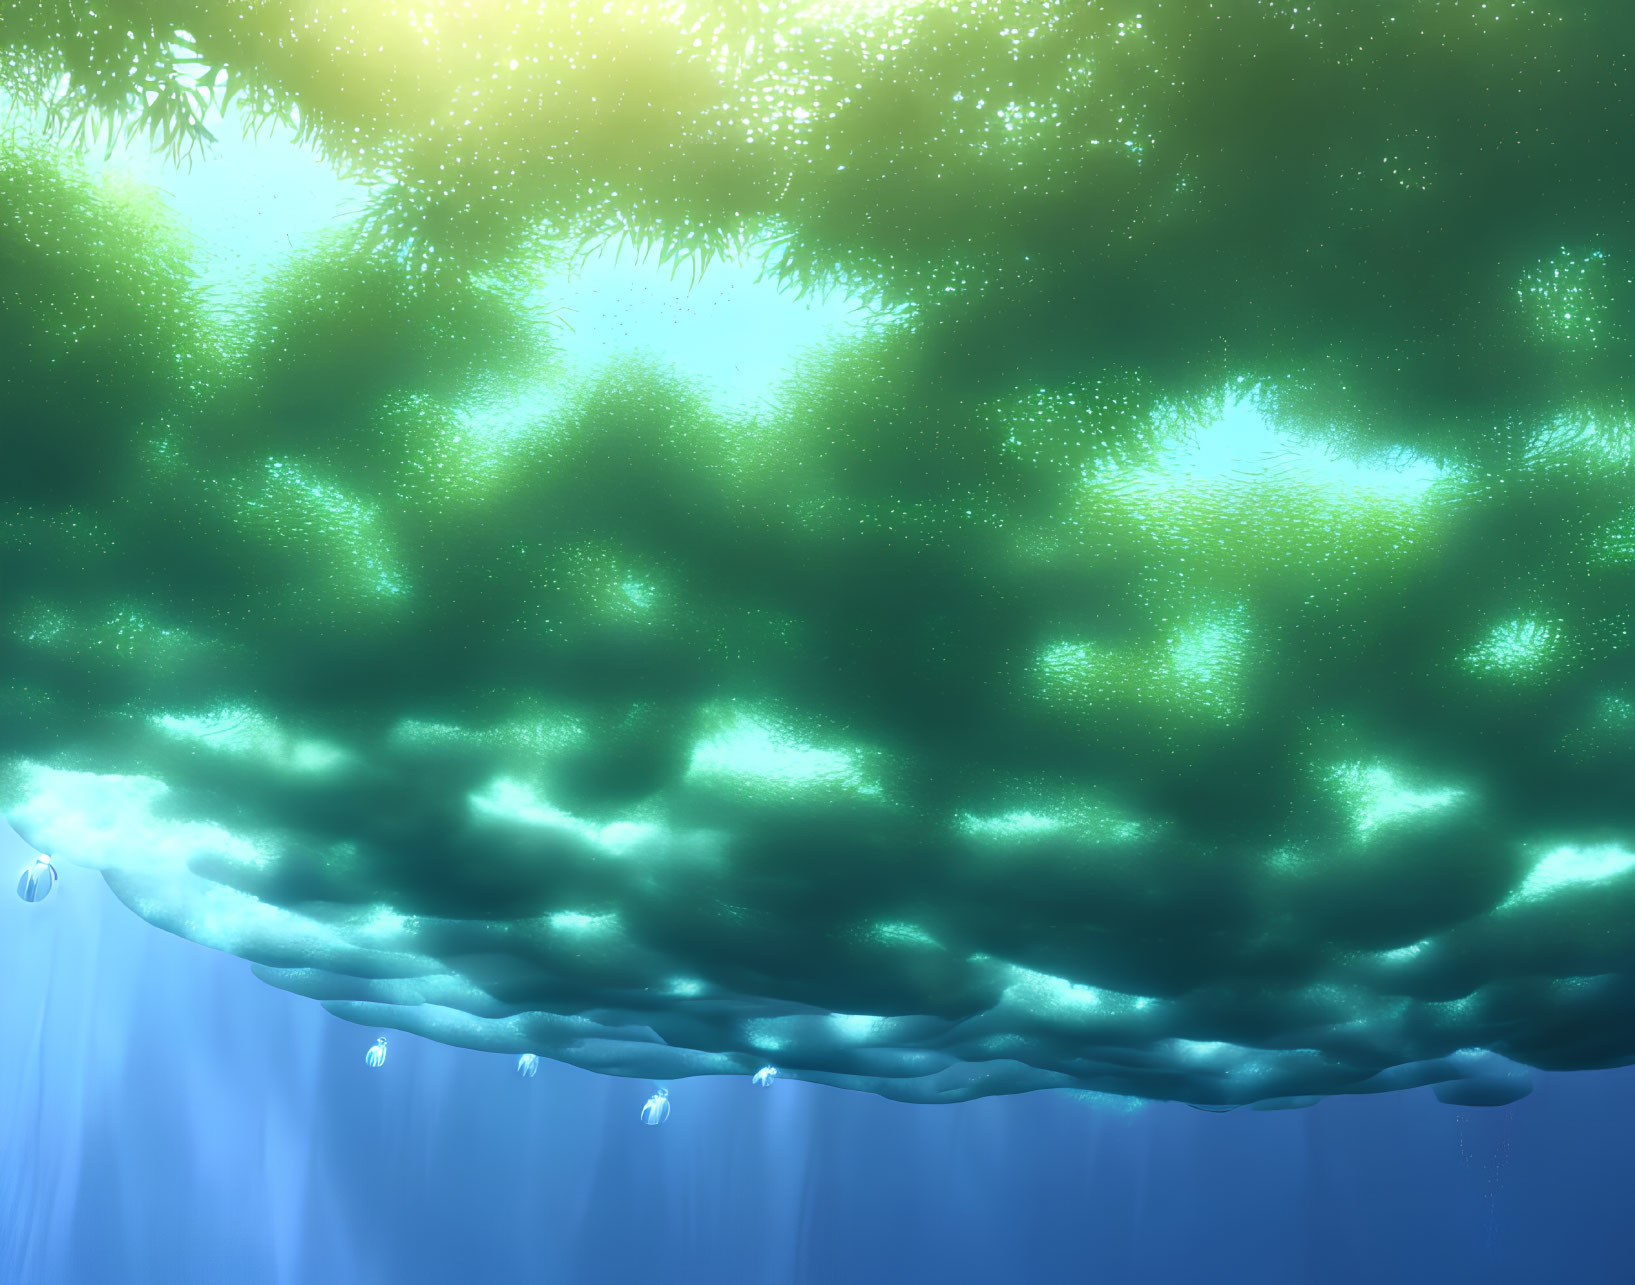 Sunlit Underwater Scene with Bubbles and Light Rays